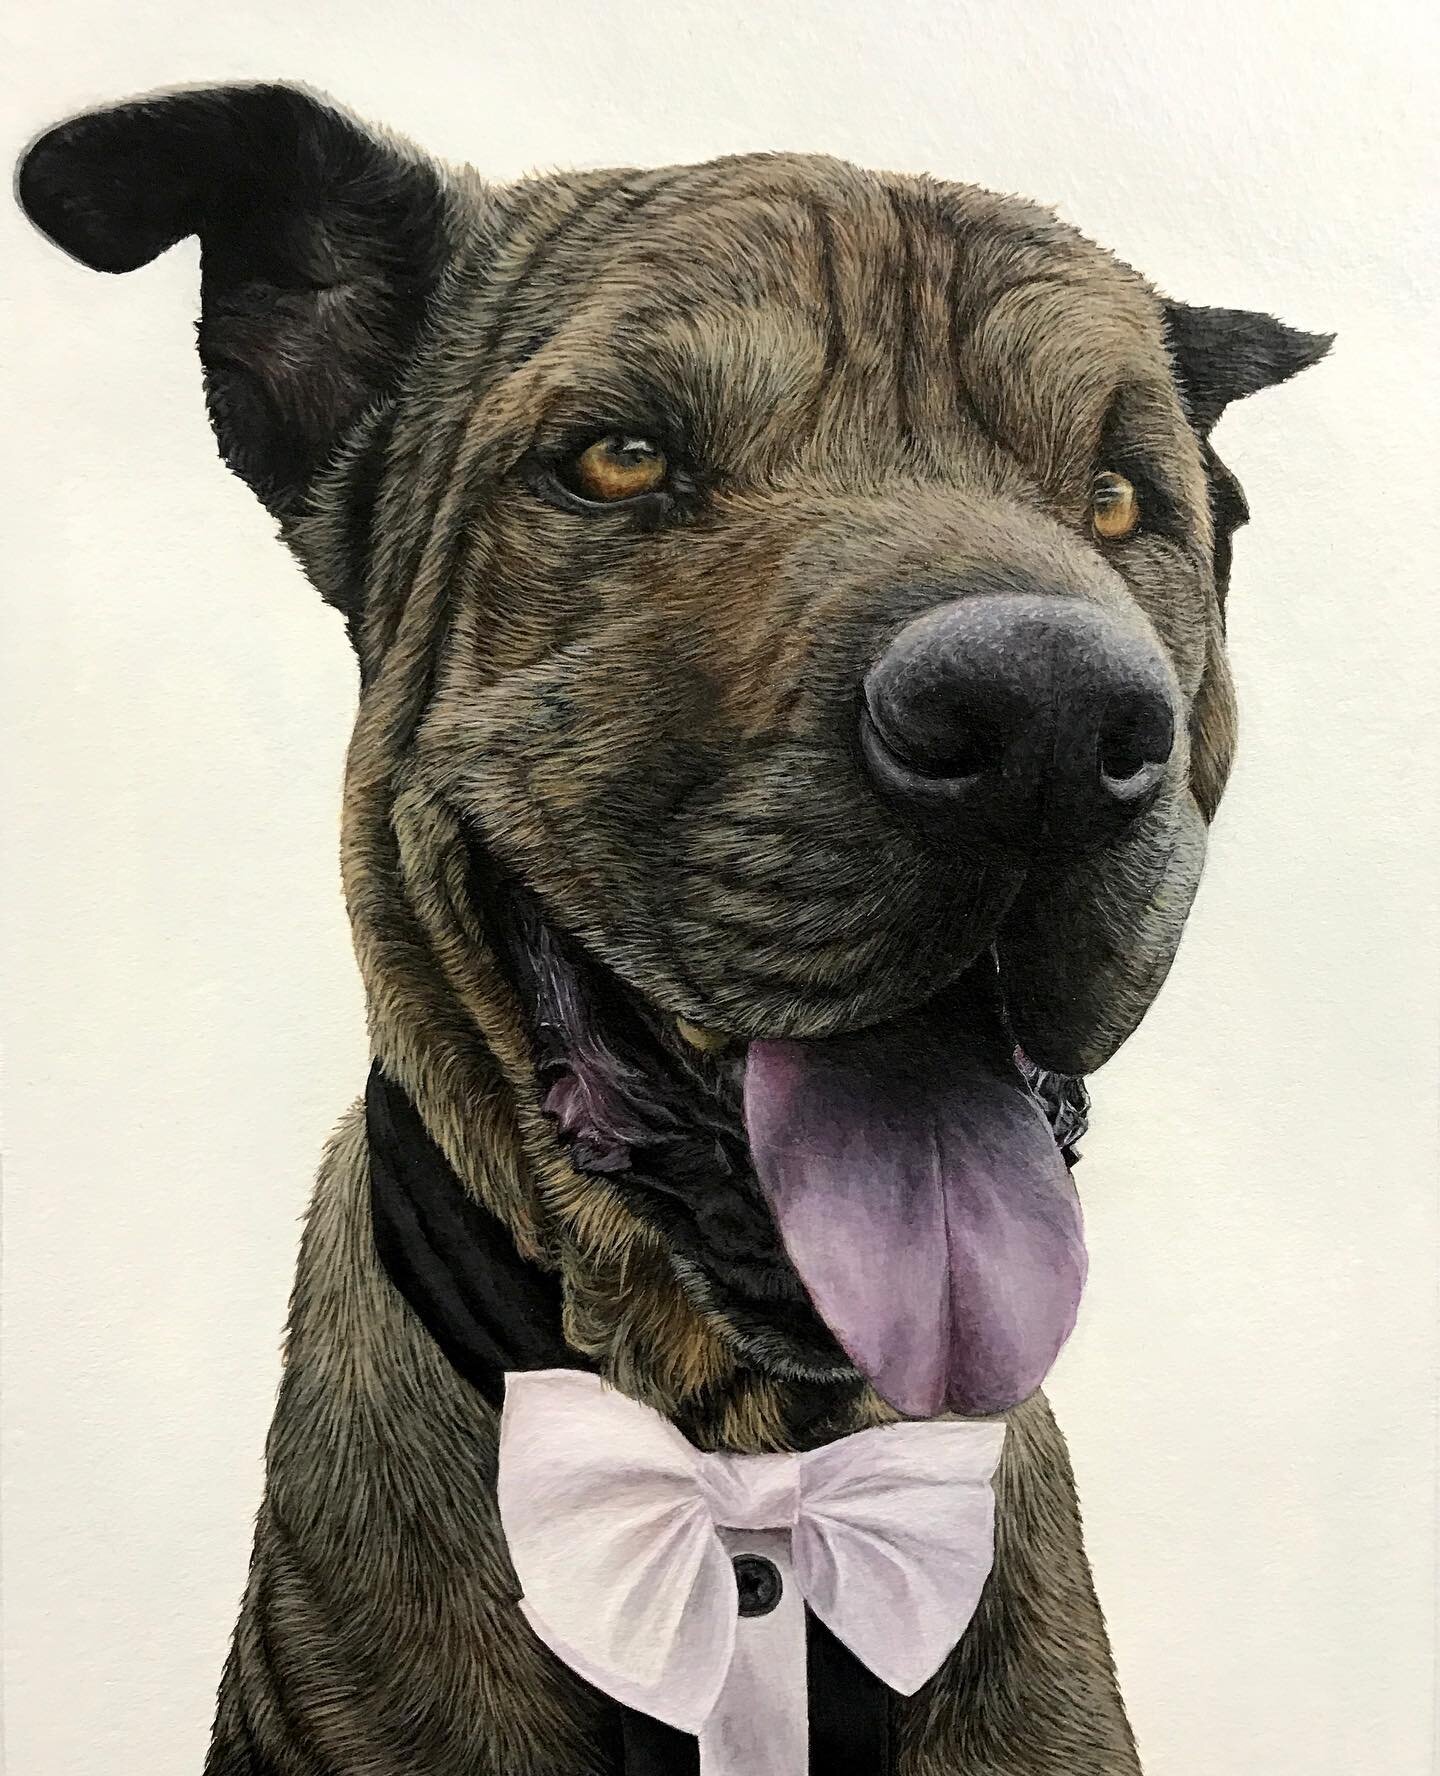 Meet &lsquo;Dozer&rsquo;! 🐶 - 8x10&rdquo; Acrylic 

Had a lot of fun bringing this guy to life, and In love with his large grin and cute formal wear 💜 

He is the first of two paintings commissioned - the 2nd will be completed in the next month. Ca